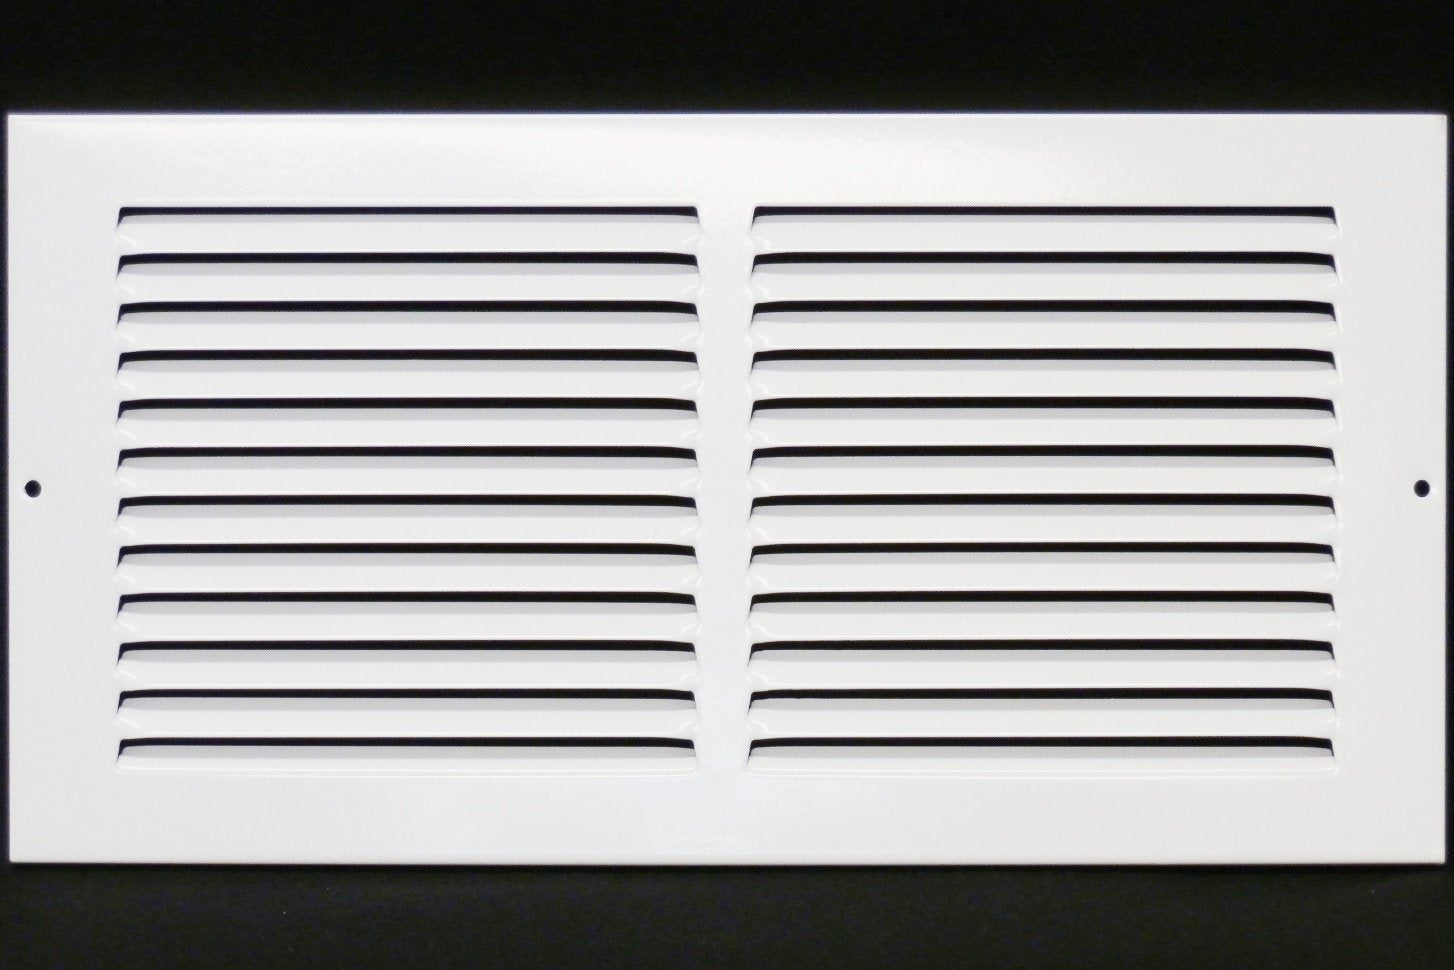 14" X 6" Air Vent Return Grilles - Sidewall and Ceiling - Steel